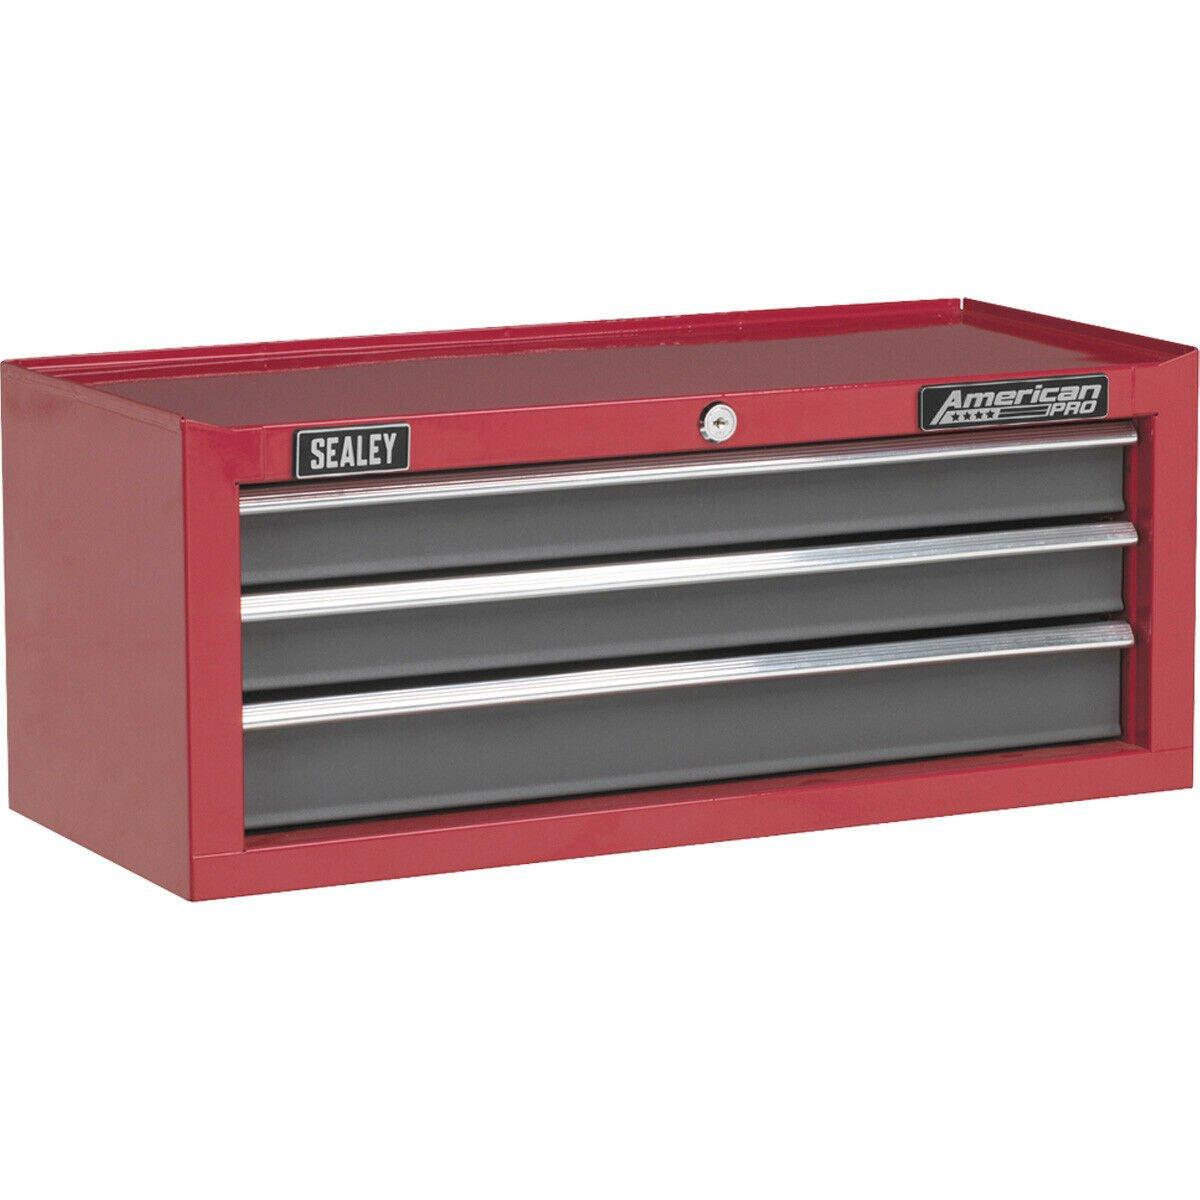 605 x 260 x 250mm RED 3 Drawer MID-BOX Tool Chest Lockable Storage Unit Cabinet